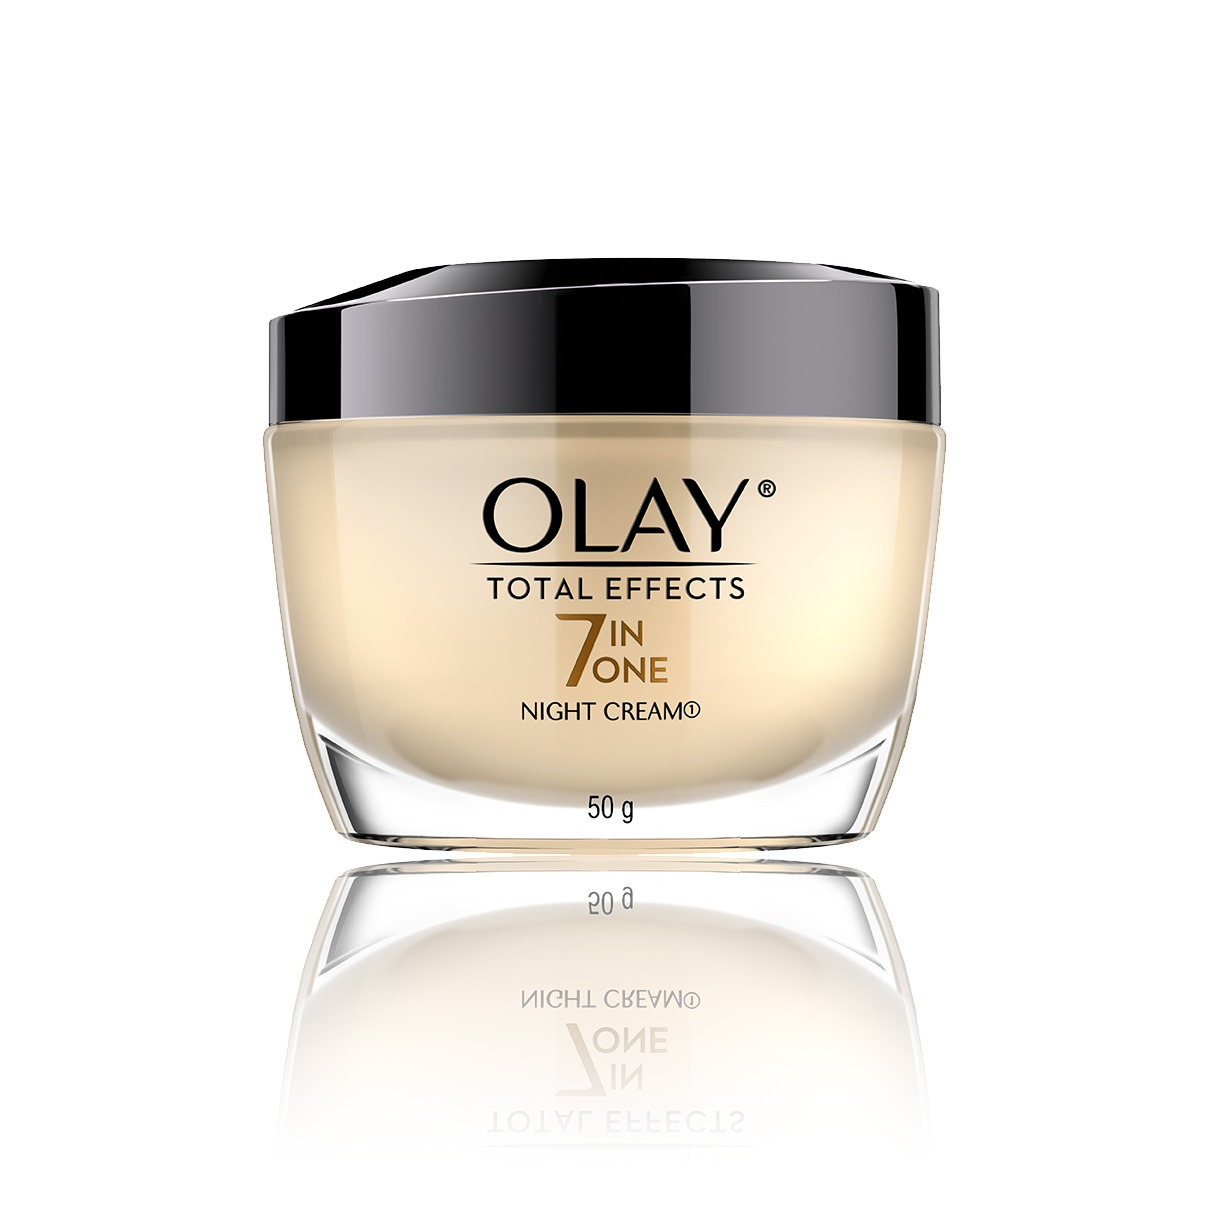 Olay Total Effects 7 in 1 Night Cream 50grams